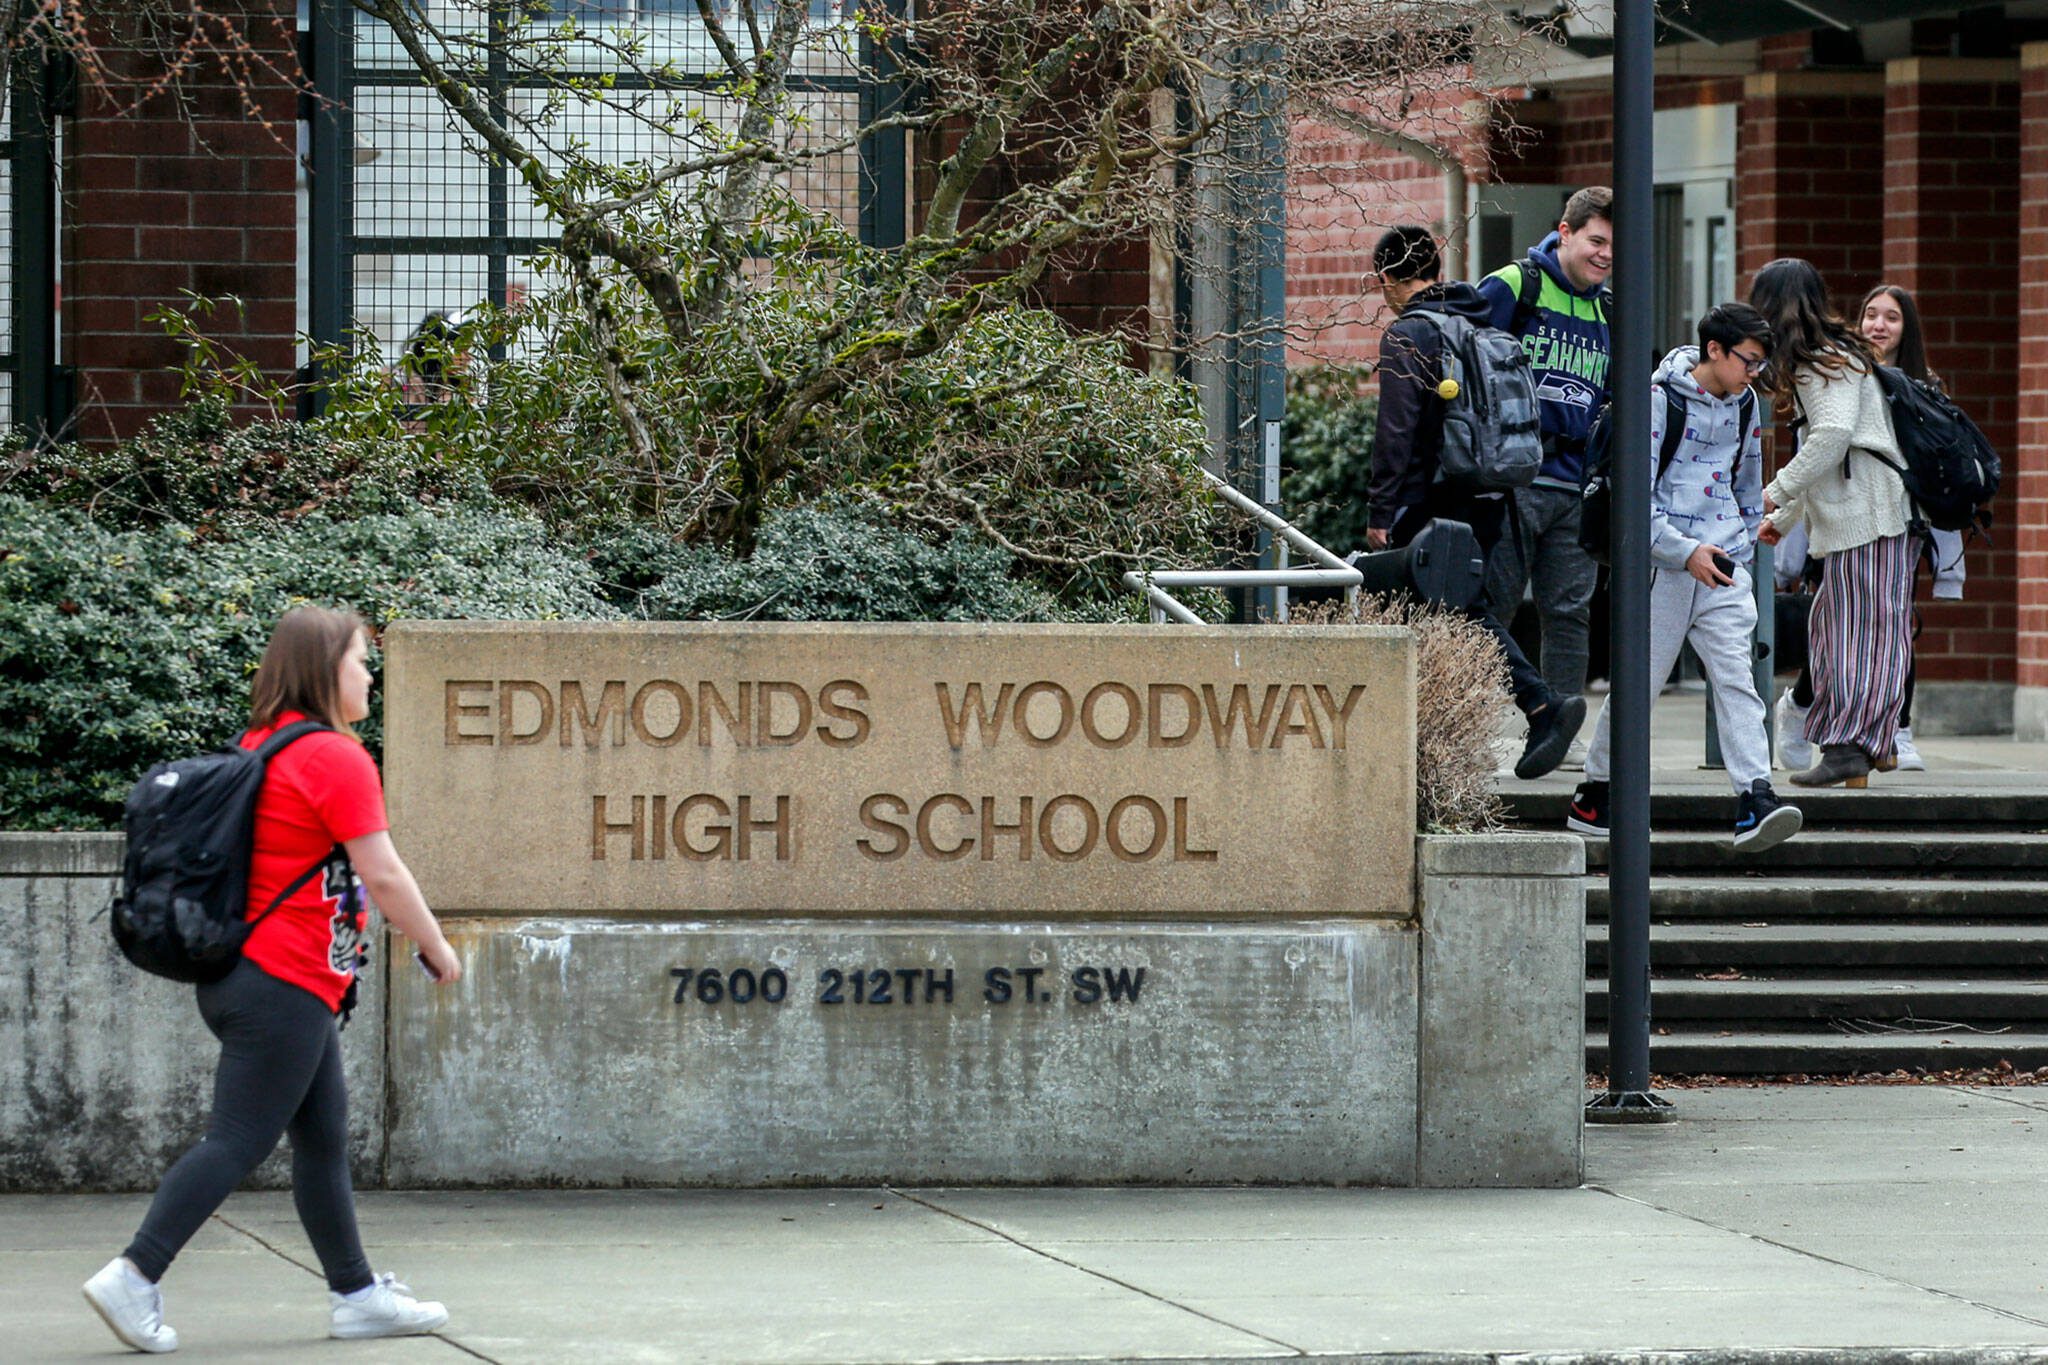 Students make their way after school at Edmonds-Woodway High School on March 12, 2020. (Kevin Clark / The Herald)